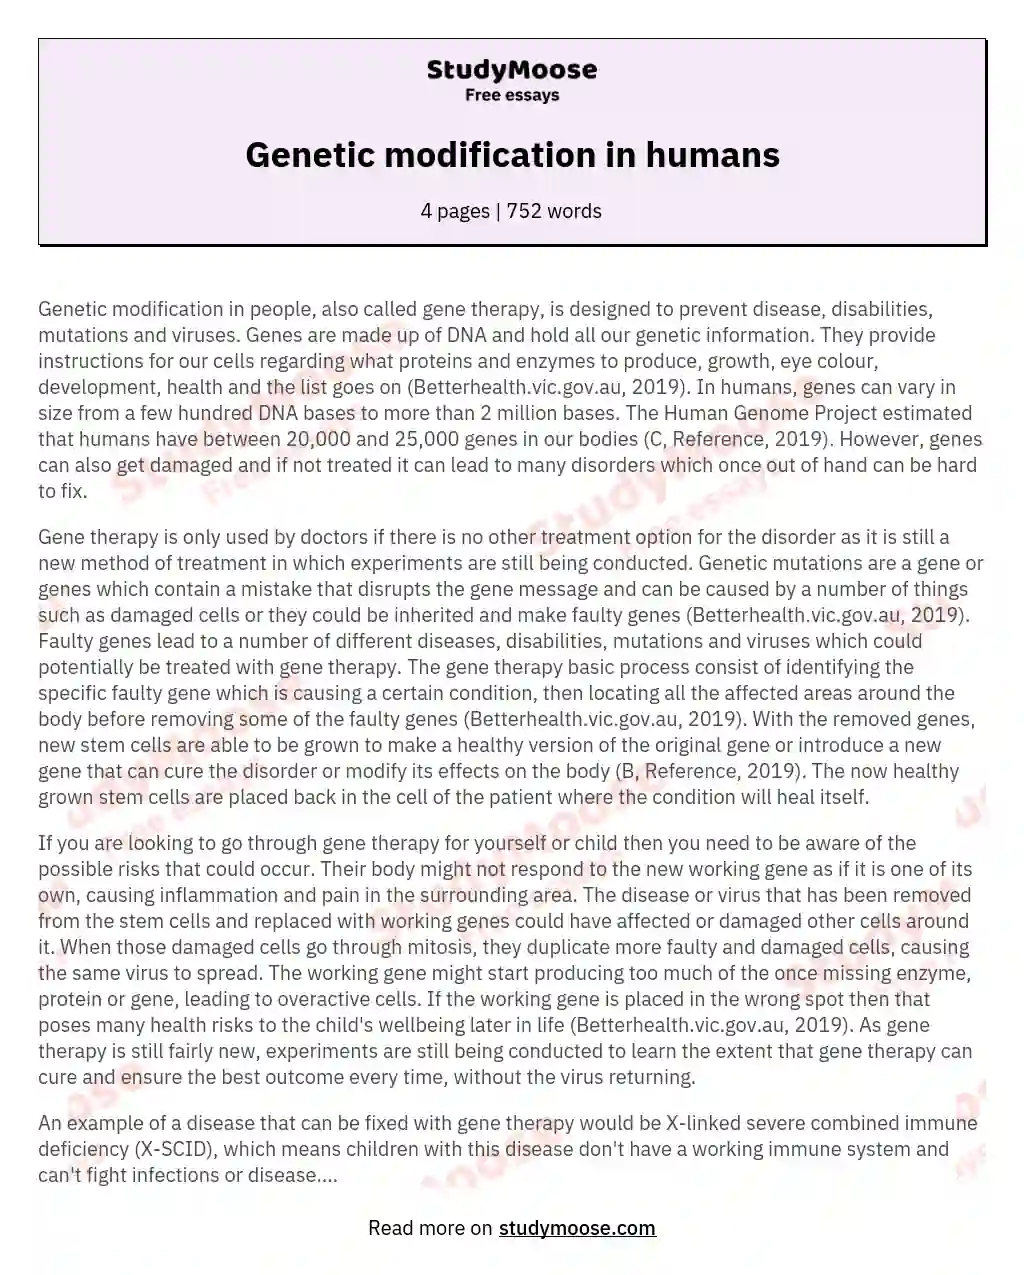 Genetic modification in humans essay